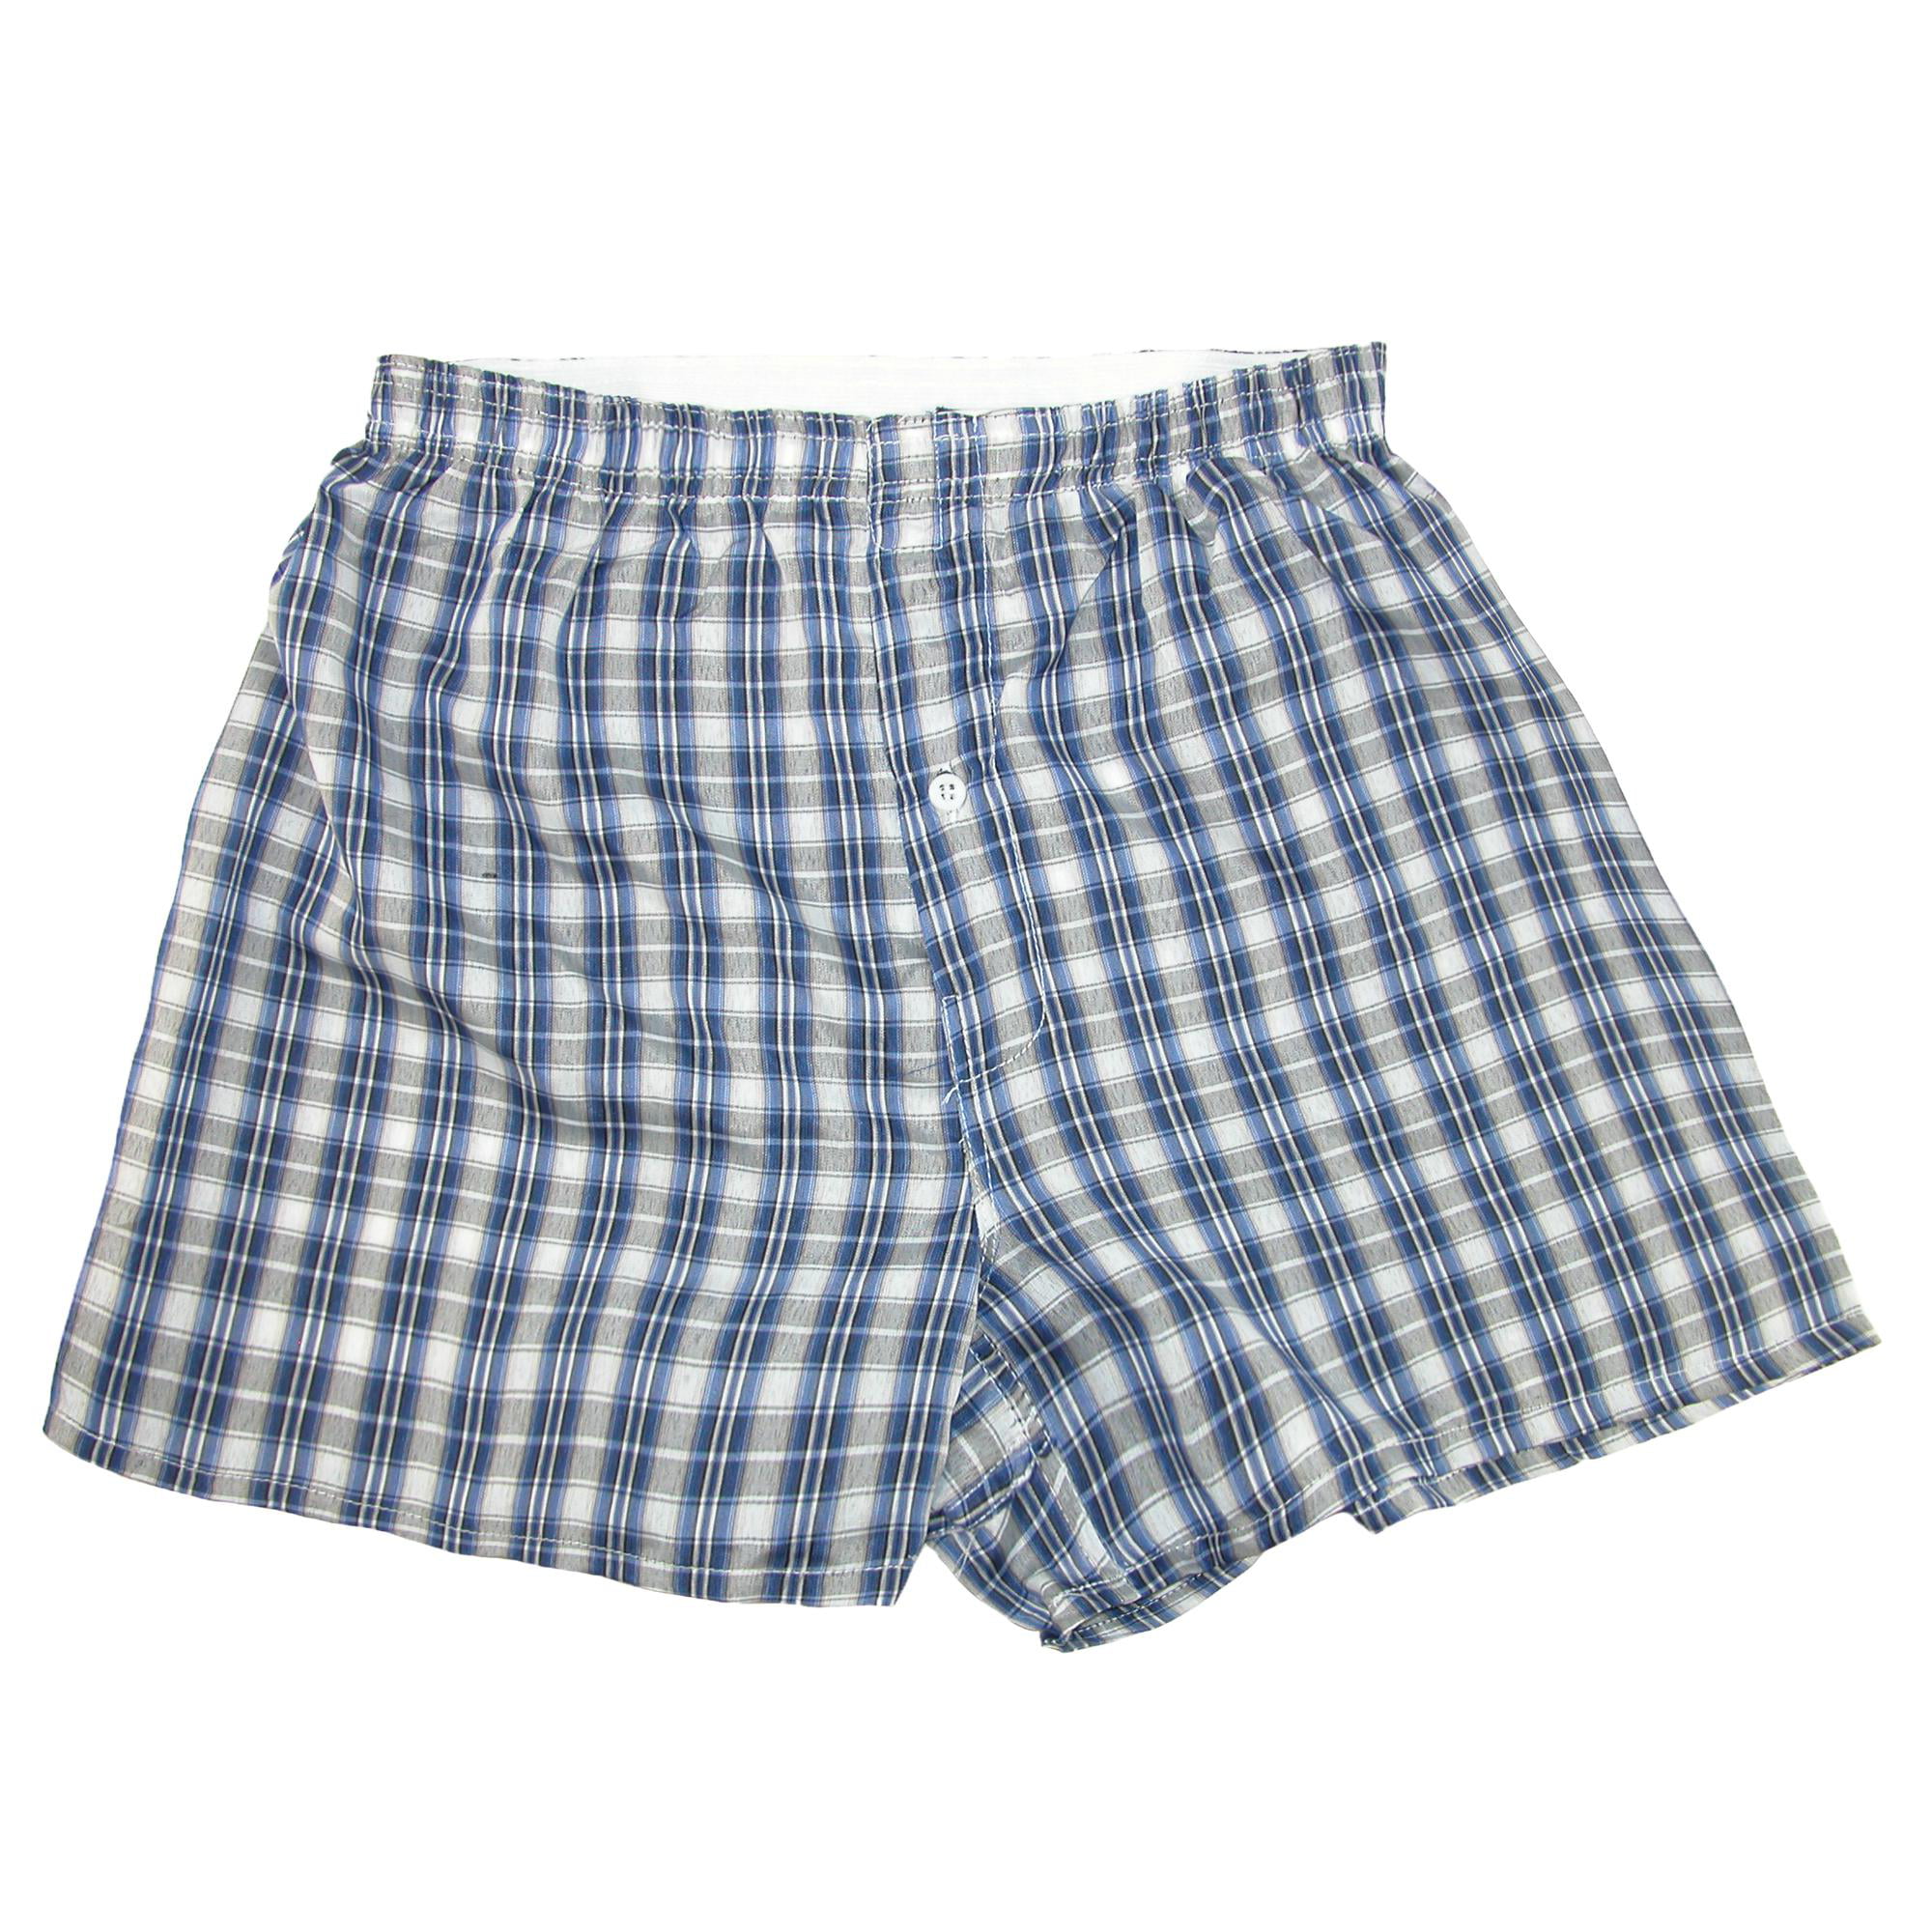 CTM Men's Big and Tall Madras Plaid Boxer Shorts (Pack of 3) | Walmart ...